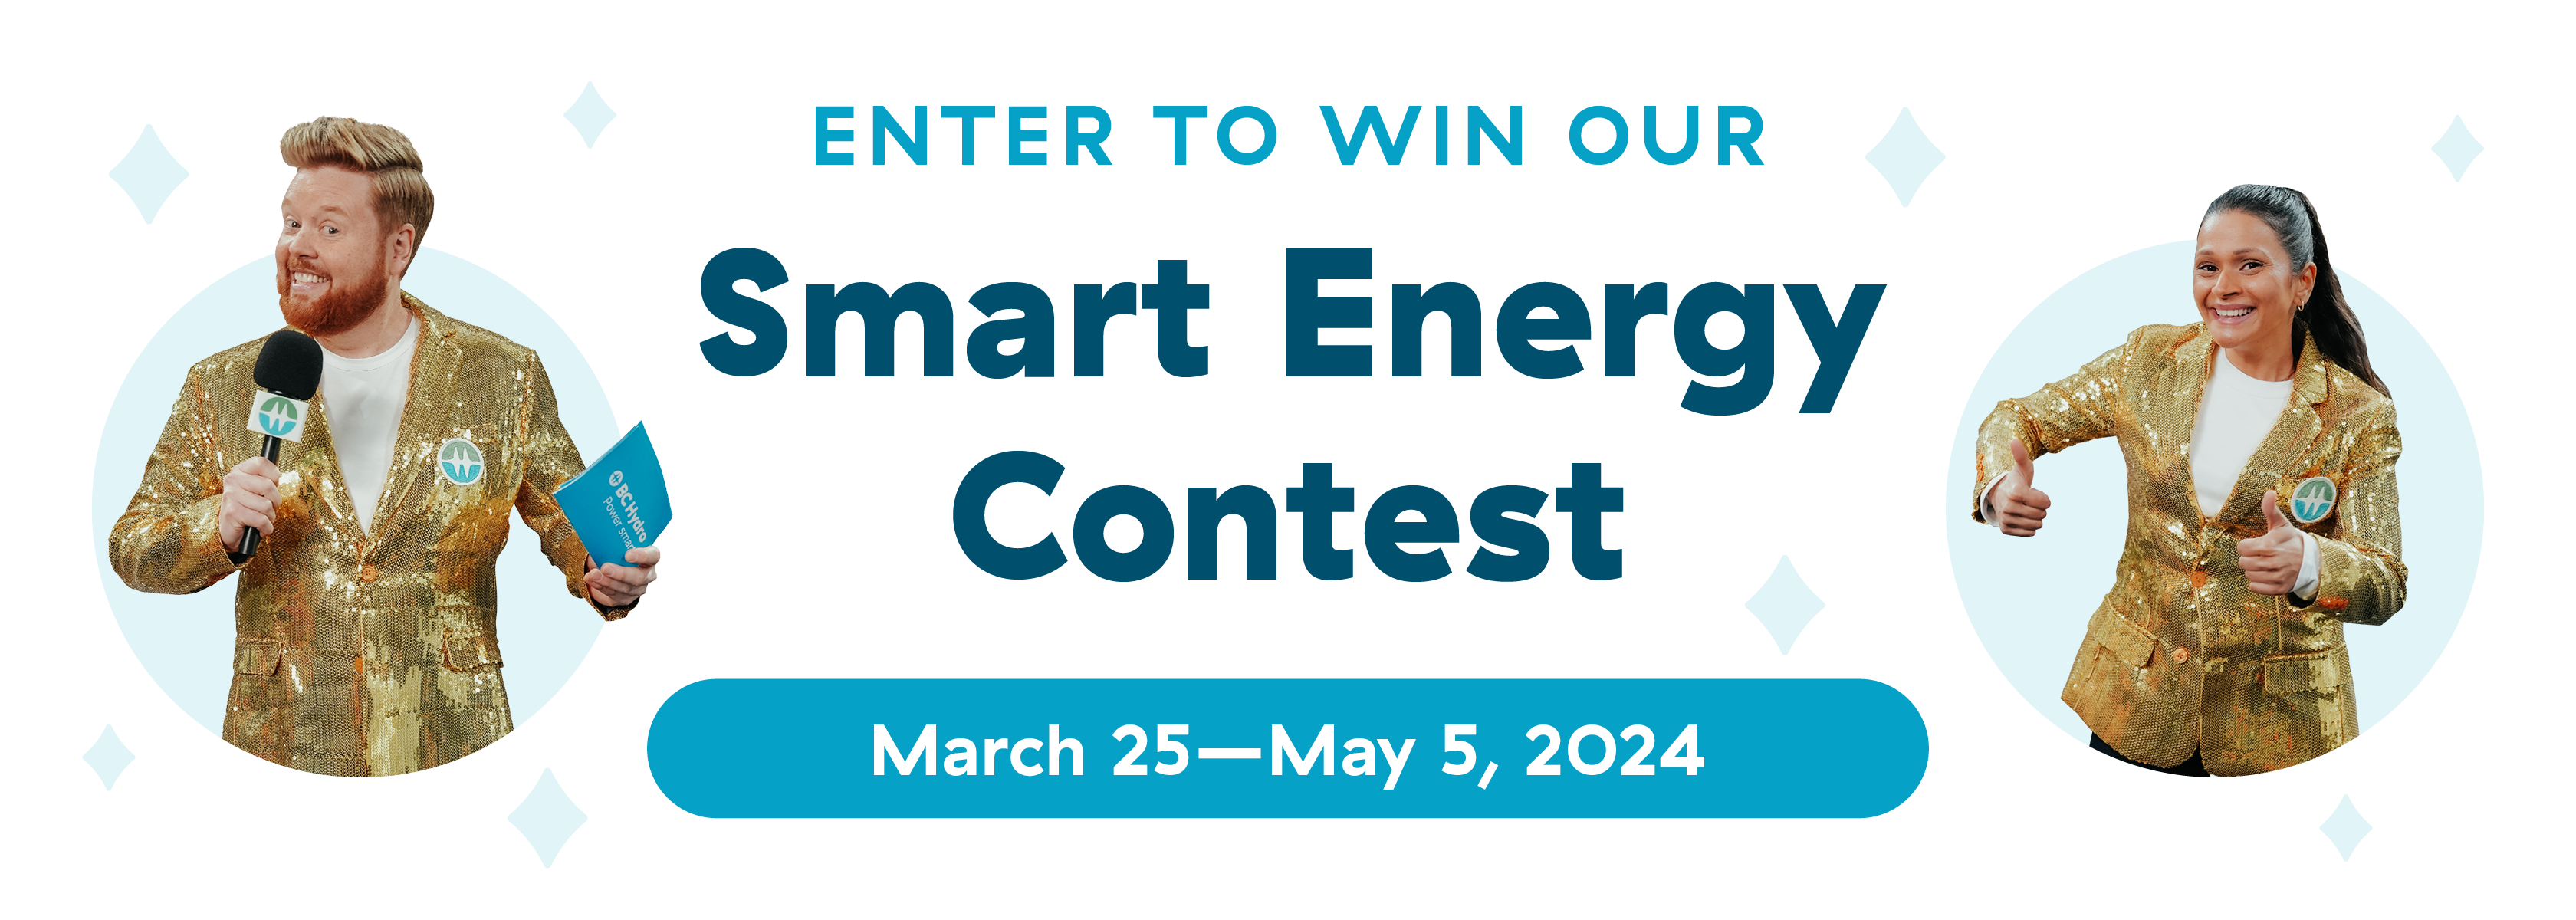 Smart energy contest (Spring campaign) March 25 to May 5, 2024